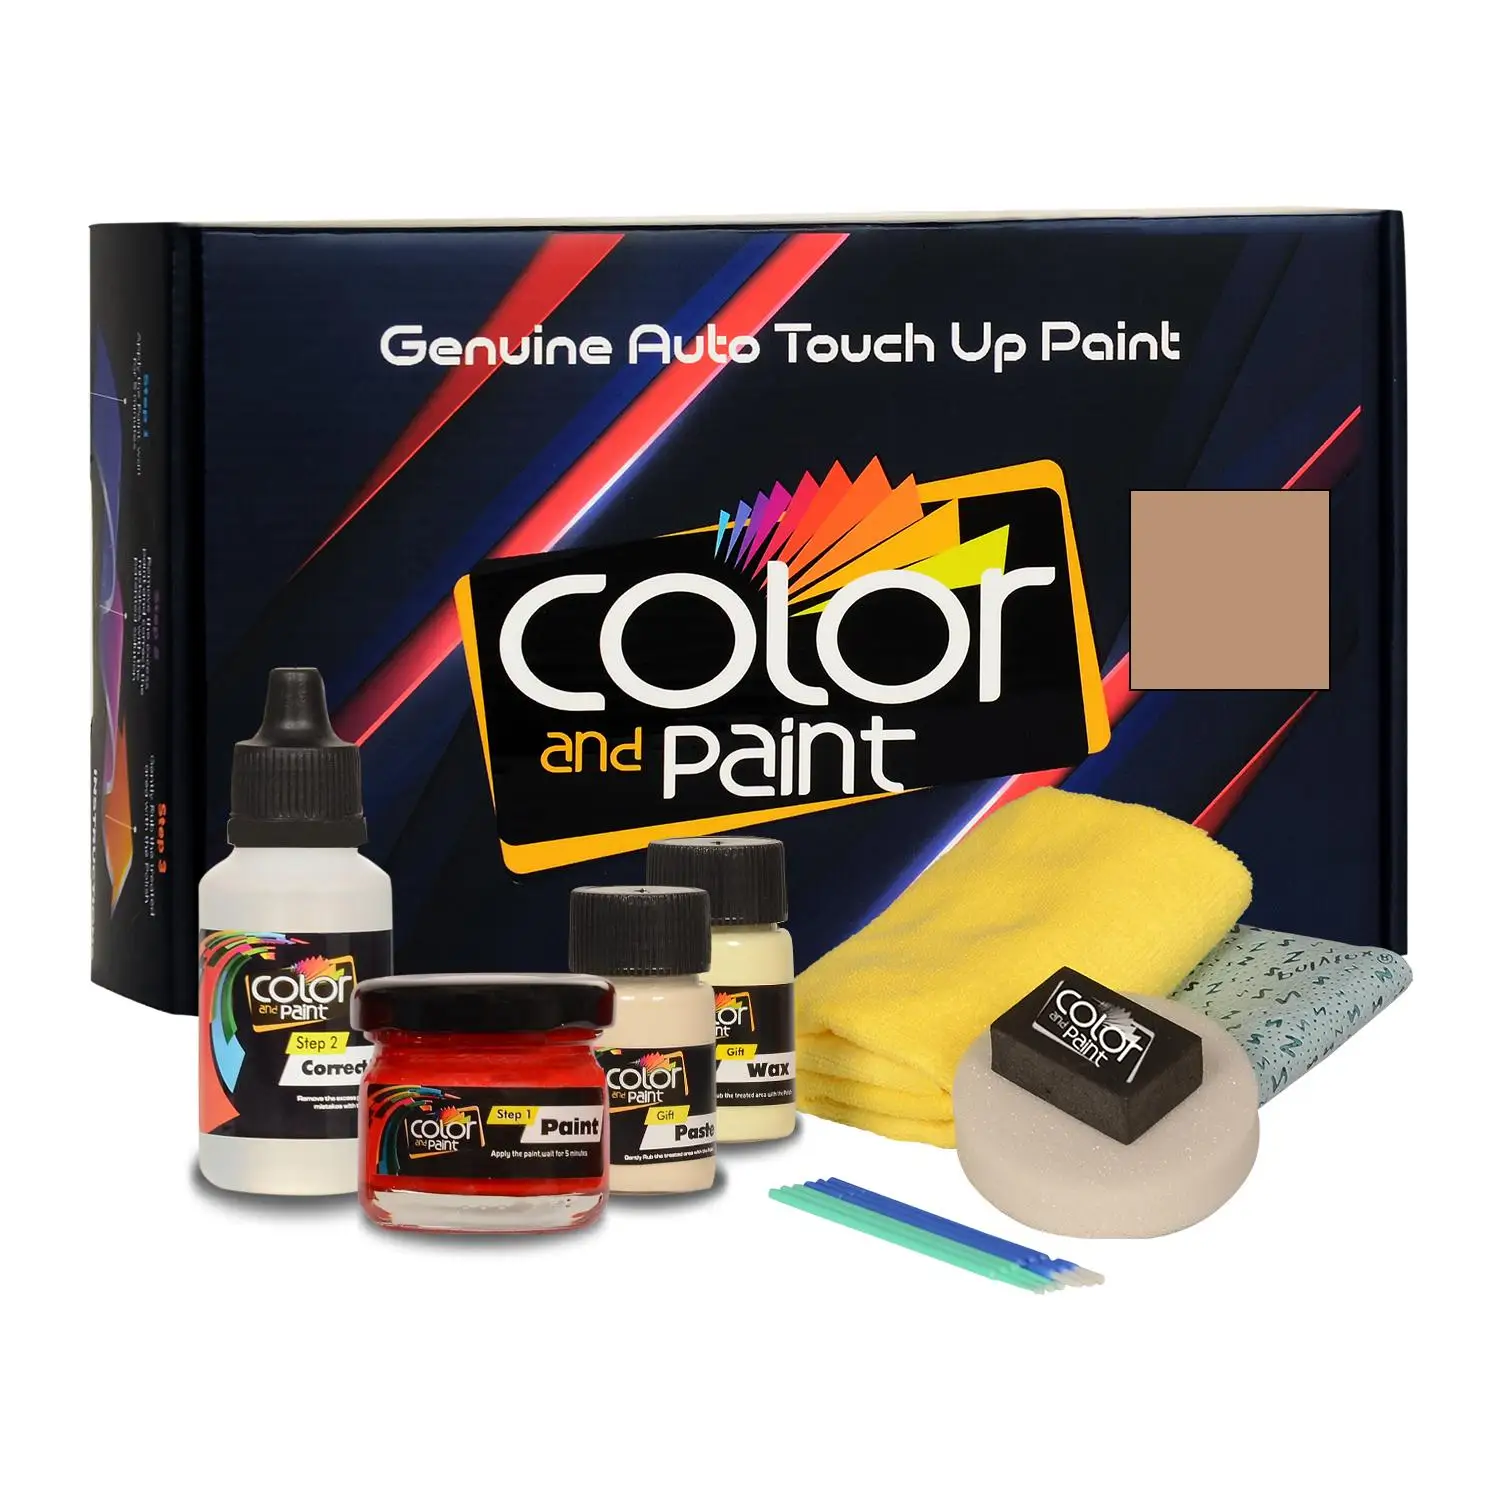 

Color and Paint compatible with Mazda Automotive Touch Up Paint - MAYA GOLD MET - M5 - Basic Care